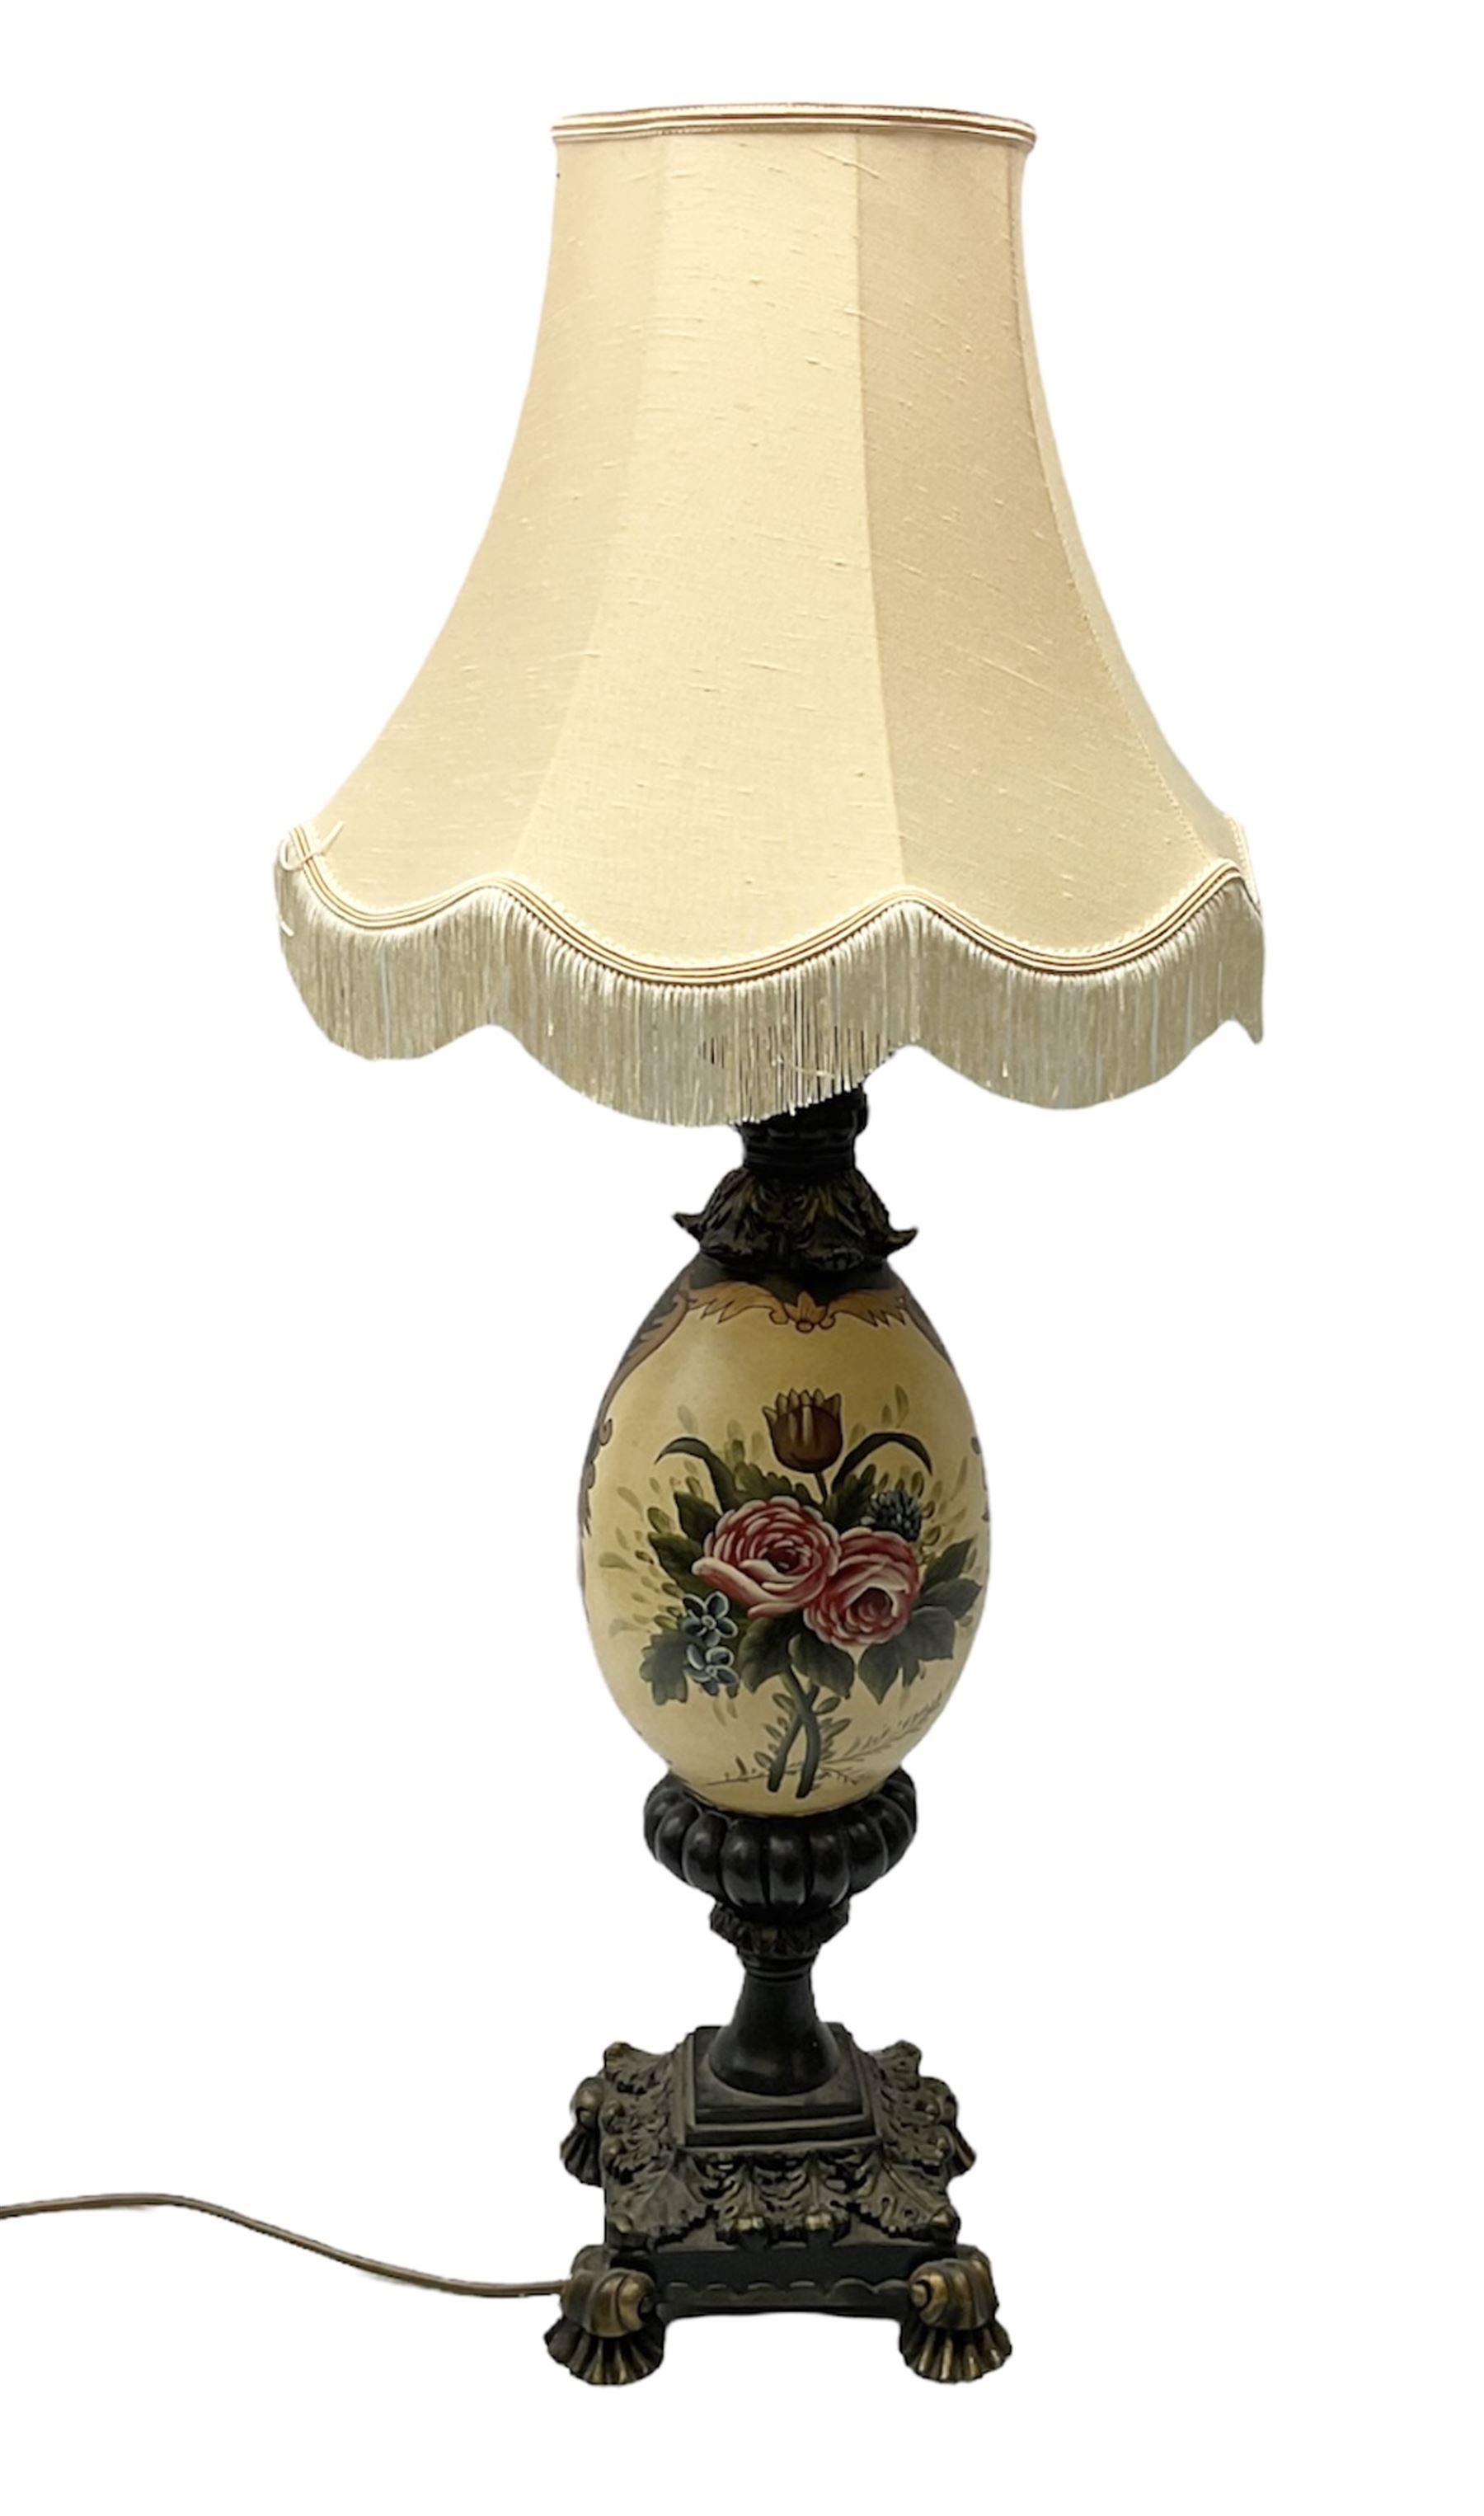 Late 19th/early 20th century table lamp